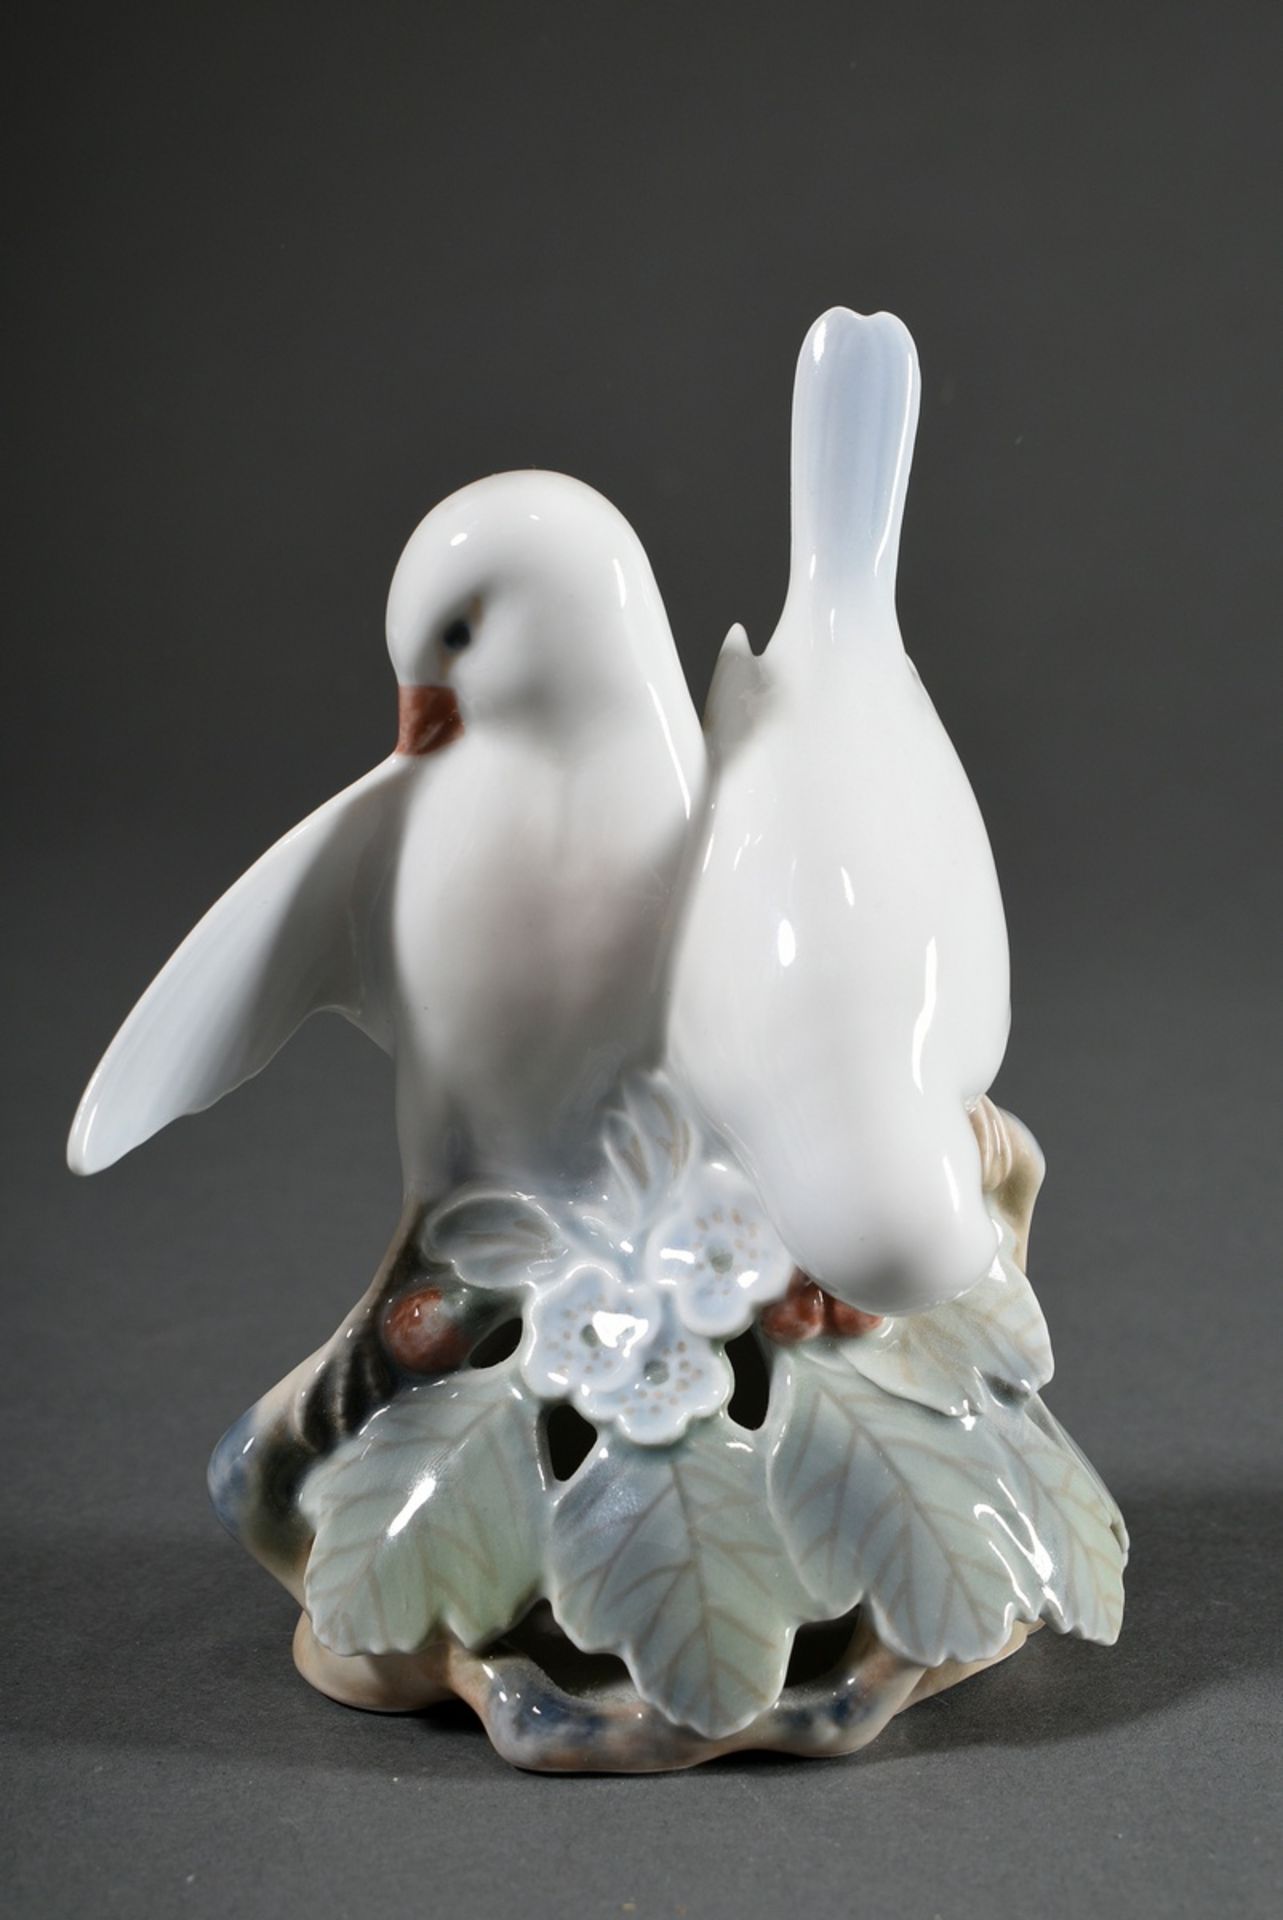 4 Various porcelain figures "Pair of Birds", "Pair of Monkeys", "Ram Rabbit" and "Standing Stag" wi - Image 5 of 13